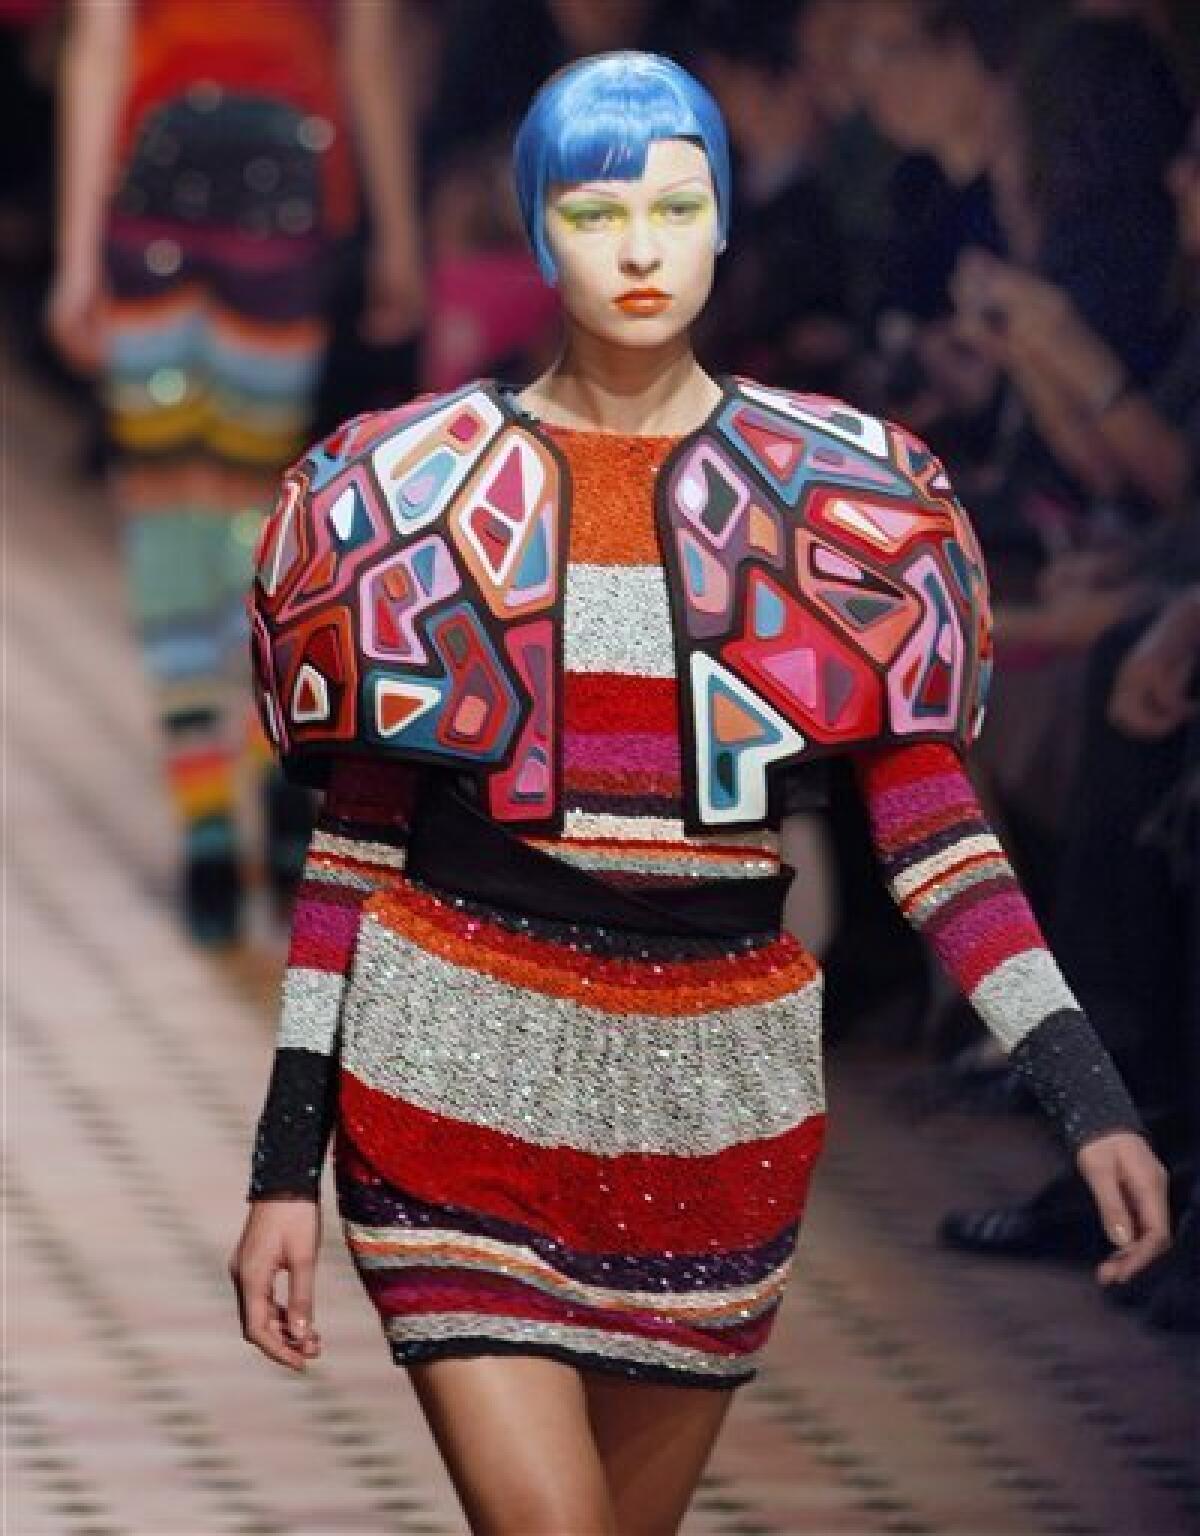 A model wears a creation by Indian fashion designer Manish Arora as part of his Fall-Winter 2010-2011 ready-to-wear collection presented in Paris, Thursday March 4, 2010. (AP Photo/Remy de la Mauviniere)